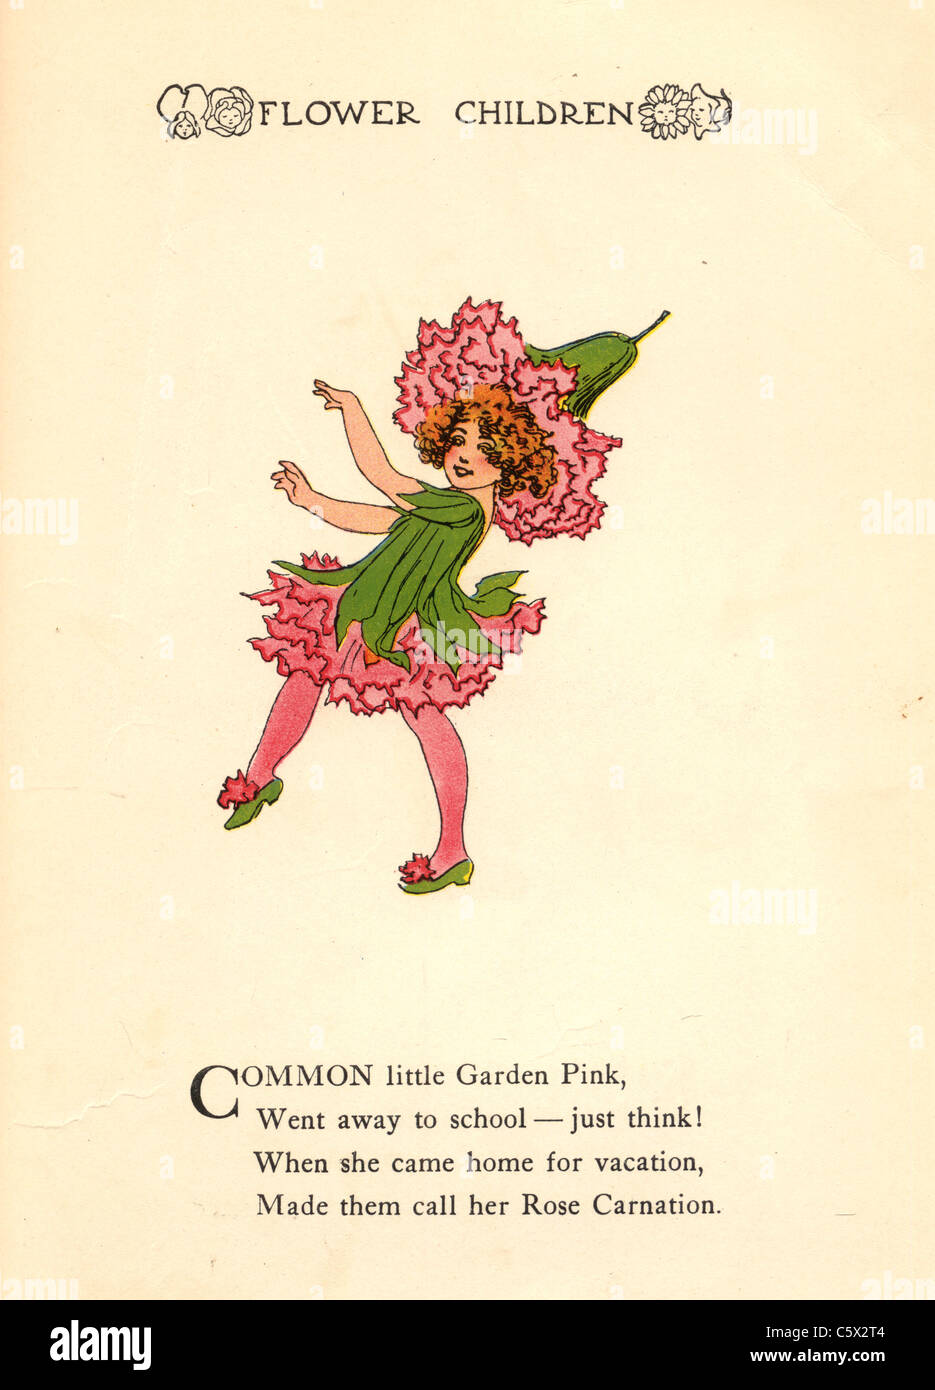 Garden Pink - Flower Child Illustration from an antiquarian book Stock Photo